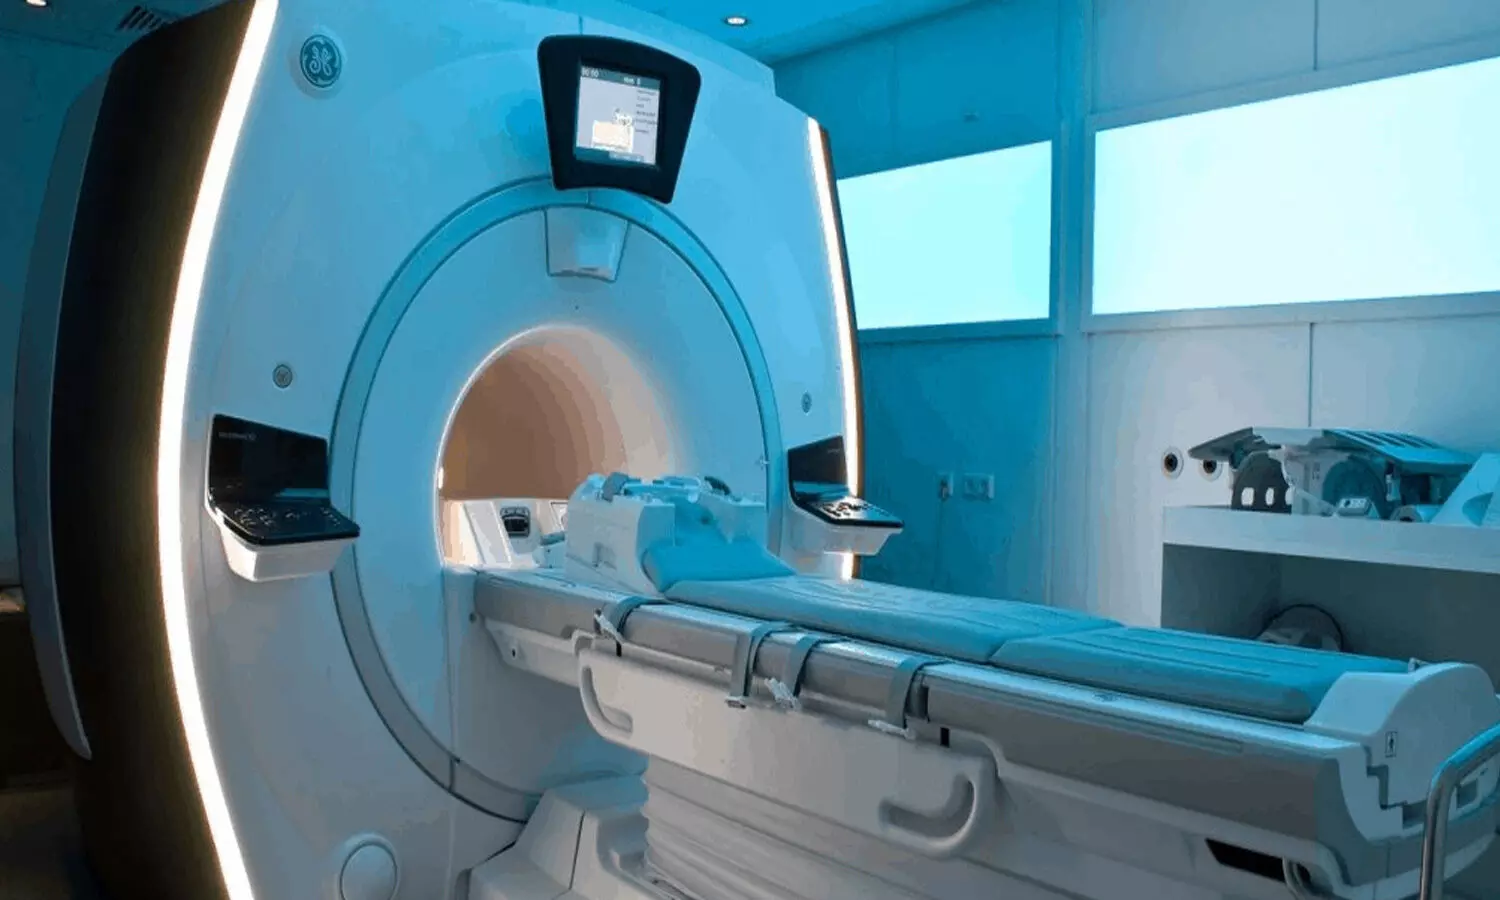 PET/MRI may detect lesions with  reduced radiation exposure compared to PET/CT